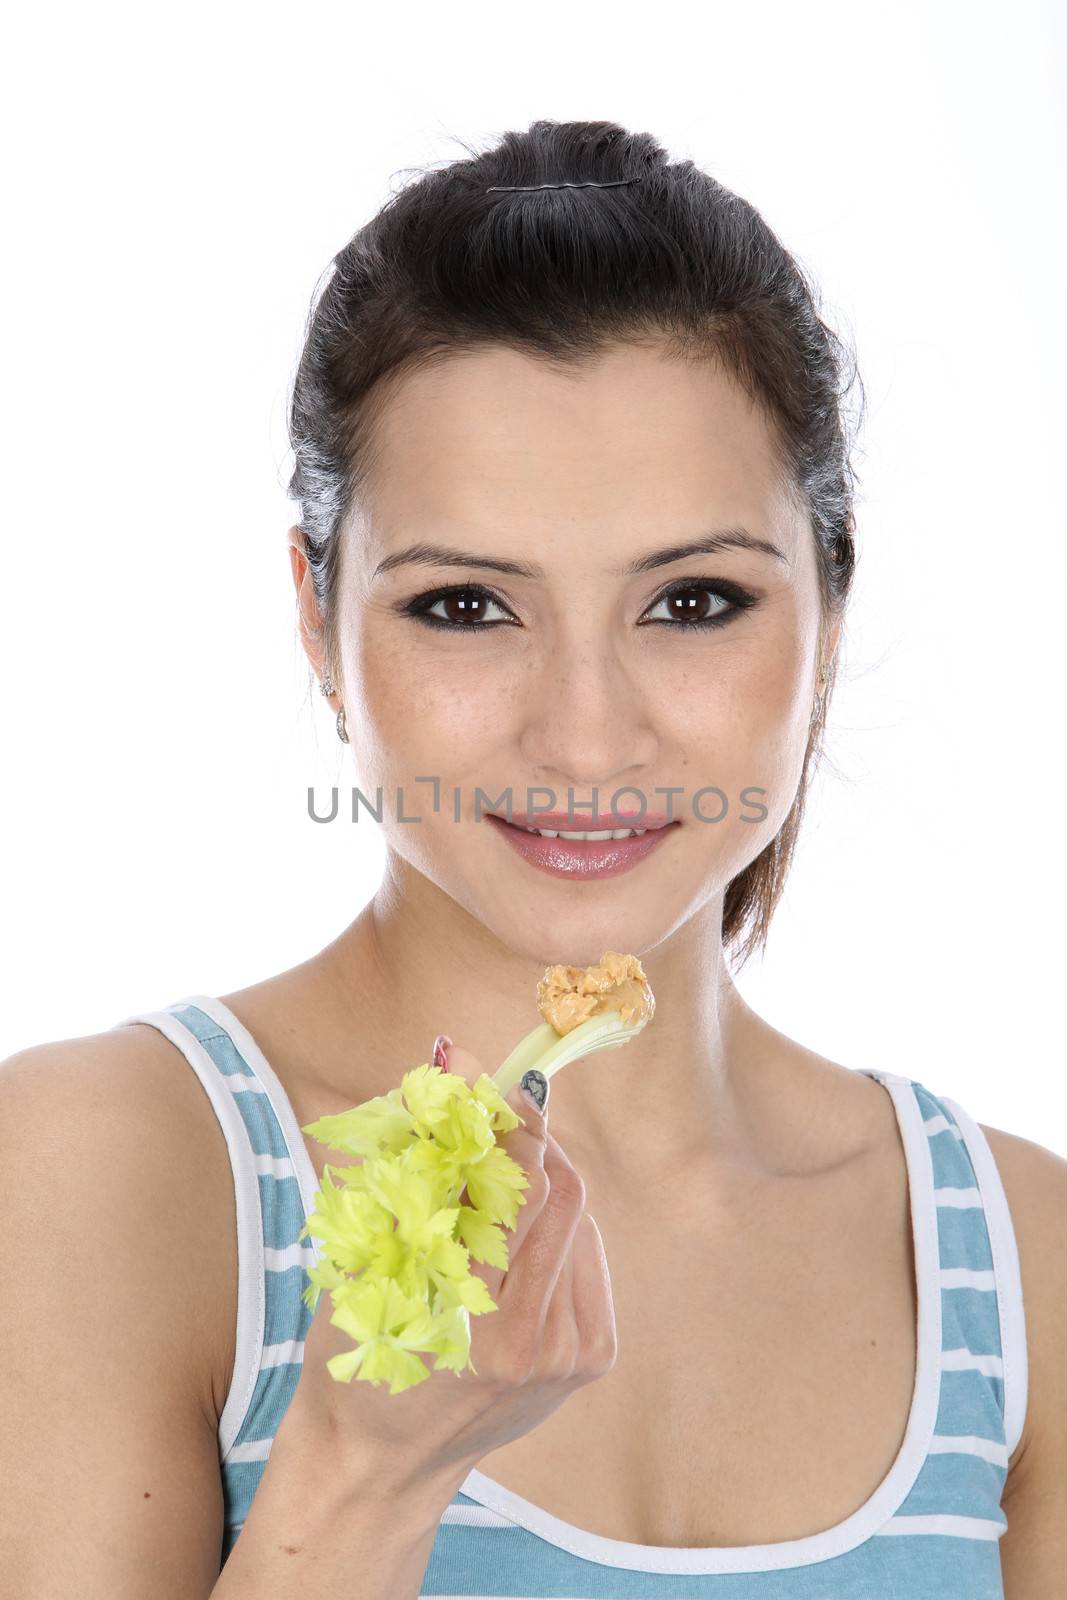 Model Released. Woman Eating Celery and Peanut Butter